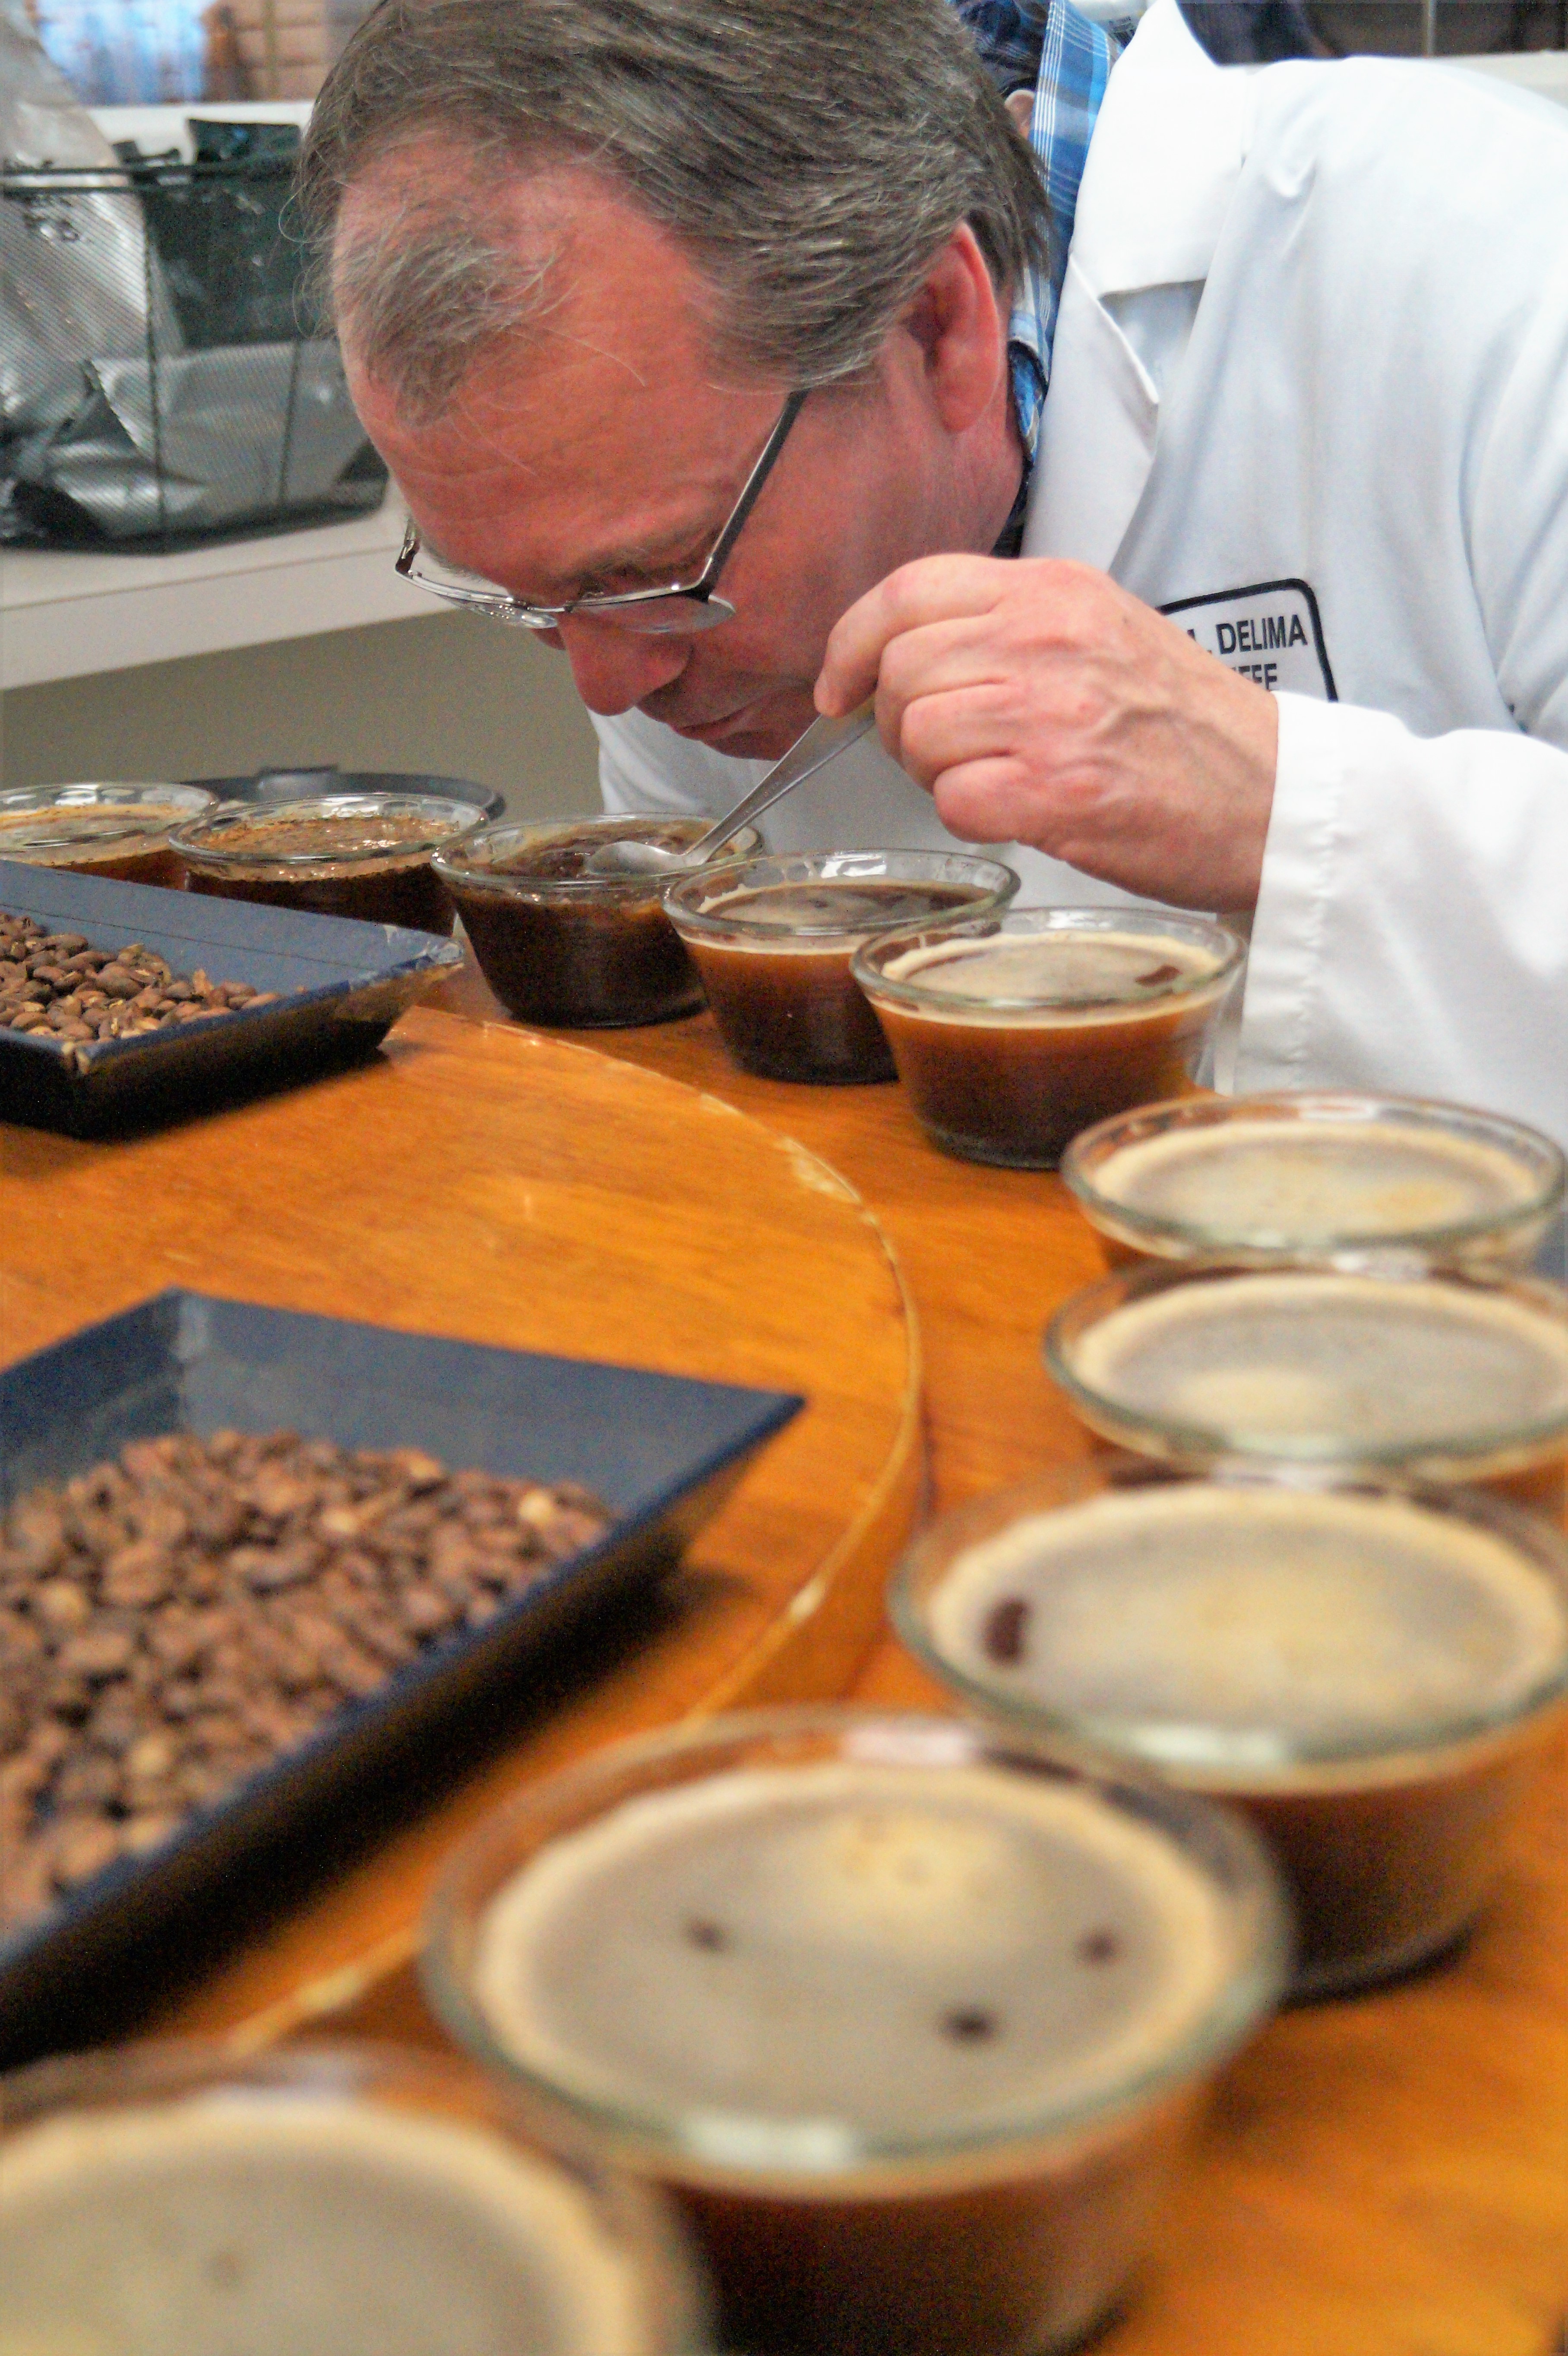 Glenn breaks the crust that forms on the top of the coffee during the cupping process as the coffee grinds soak.